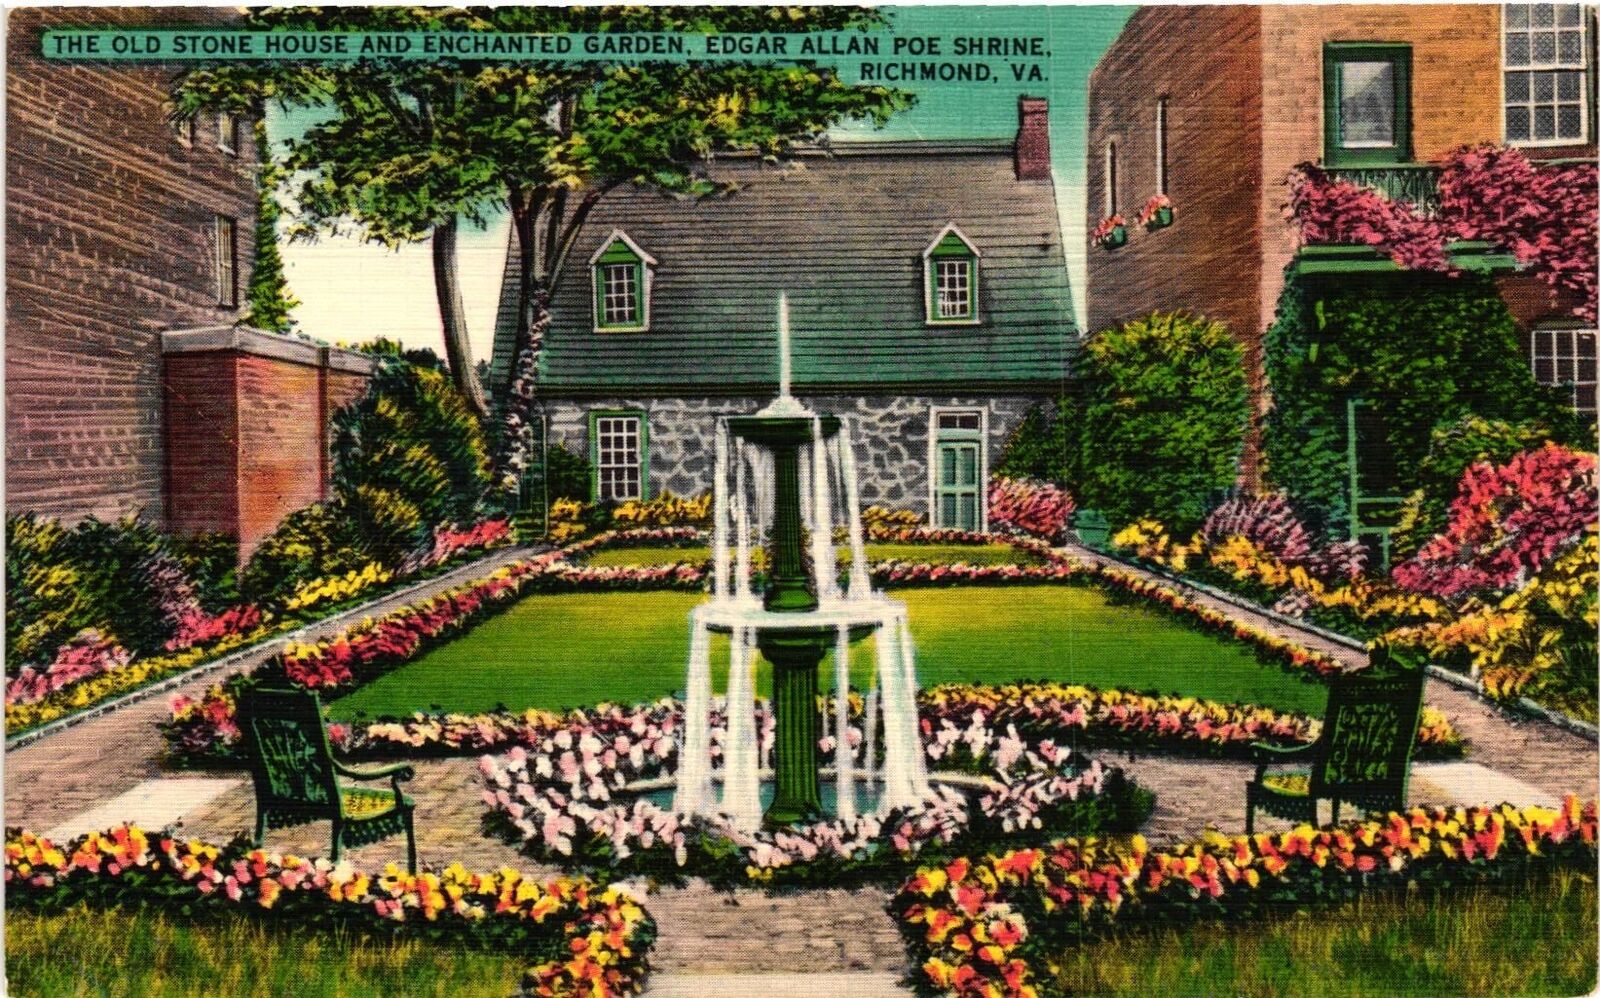 Vintage Postcard- The Old Stone House and Enchanted Garden, Richmond, VA.